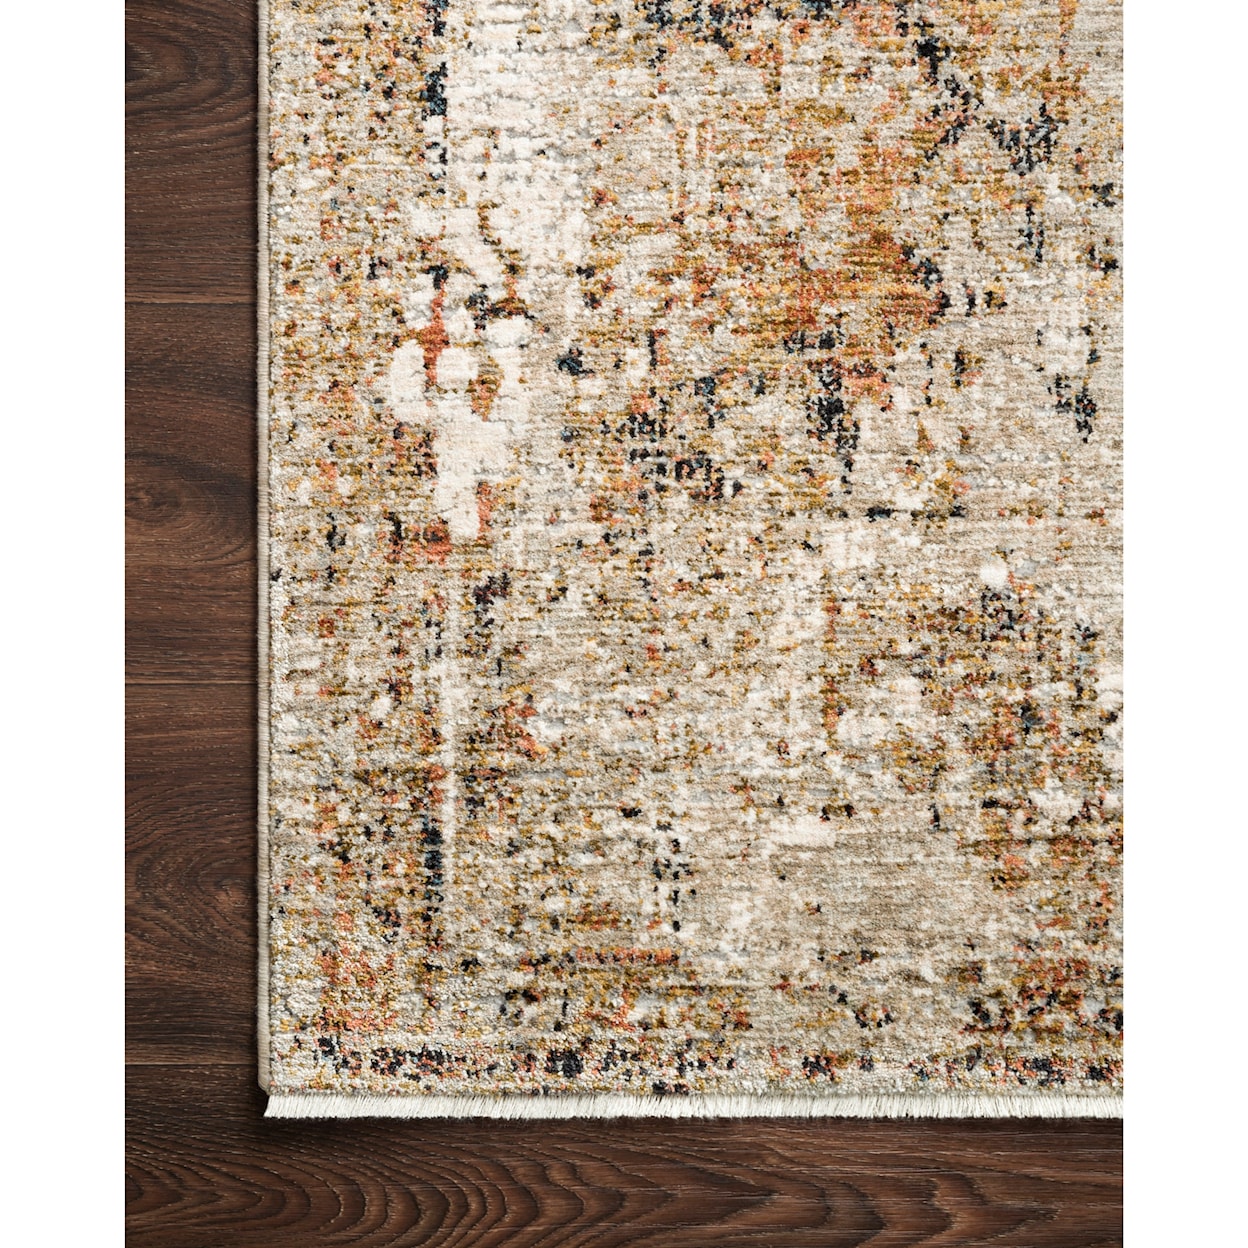 Reeds Rugs Theia 5'0" x 8'0" Taupe / Gold Rug